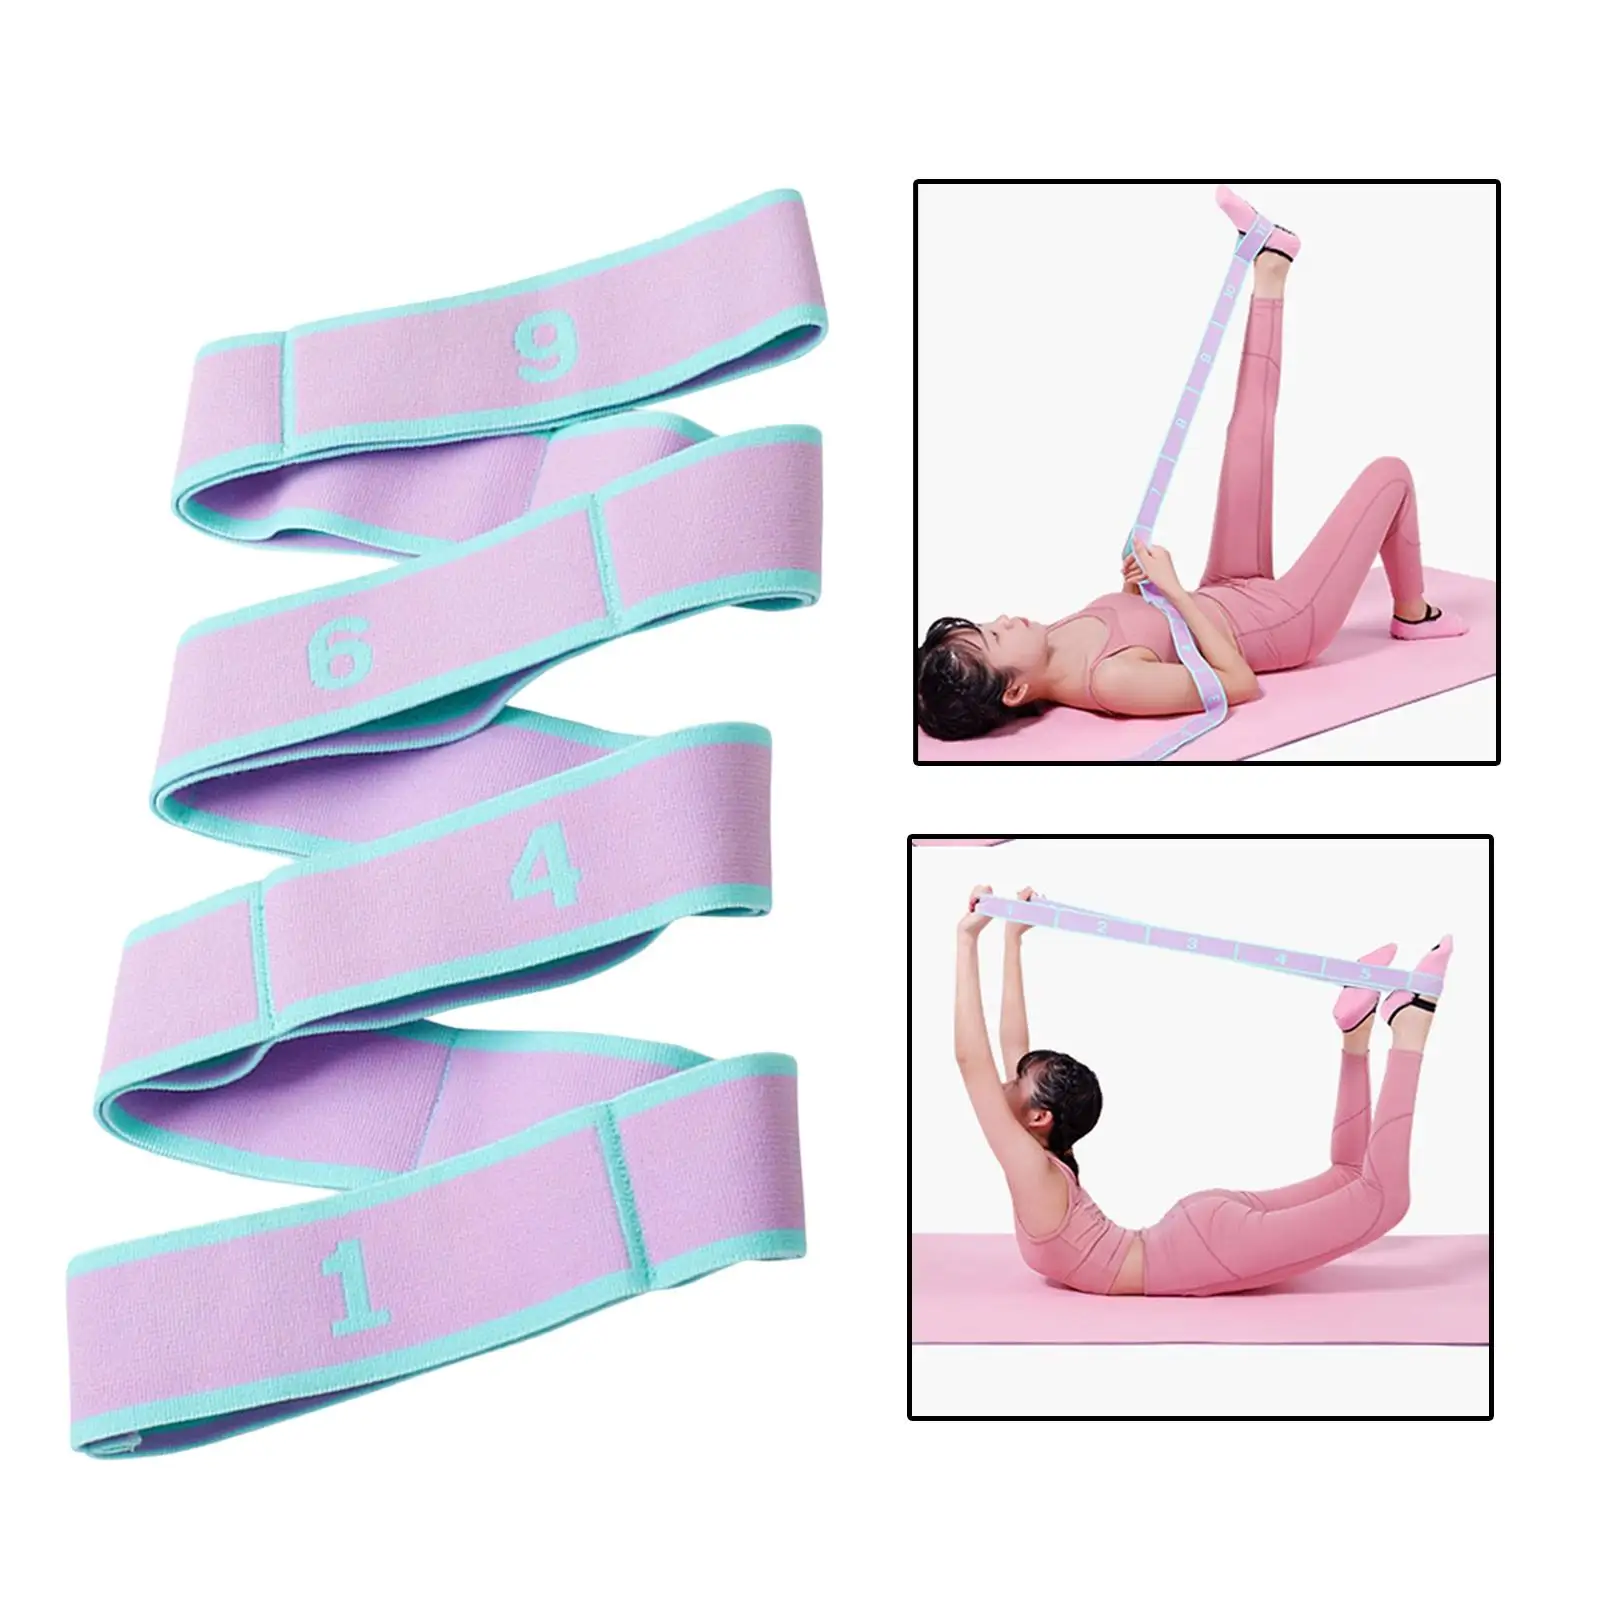 Resistance Band Multi Ring Exercise Elastic Belt Strap Stretch Stretching Strap for Home Improve Flexibility Beginner Dance